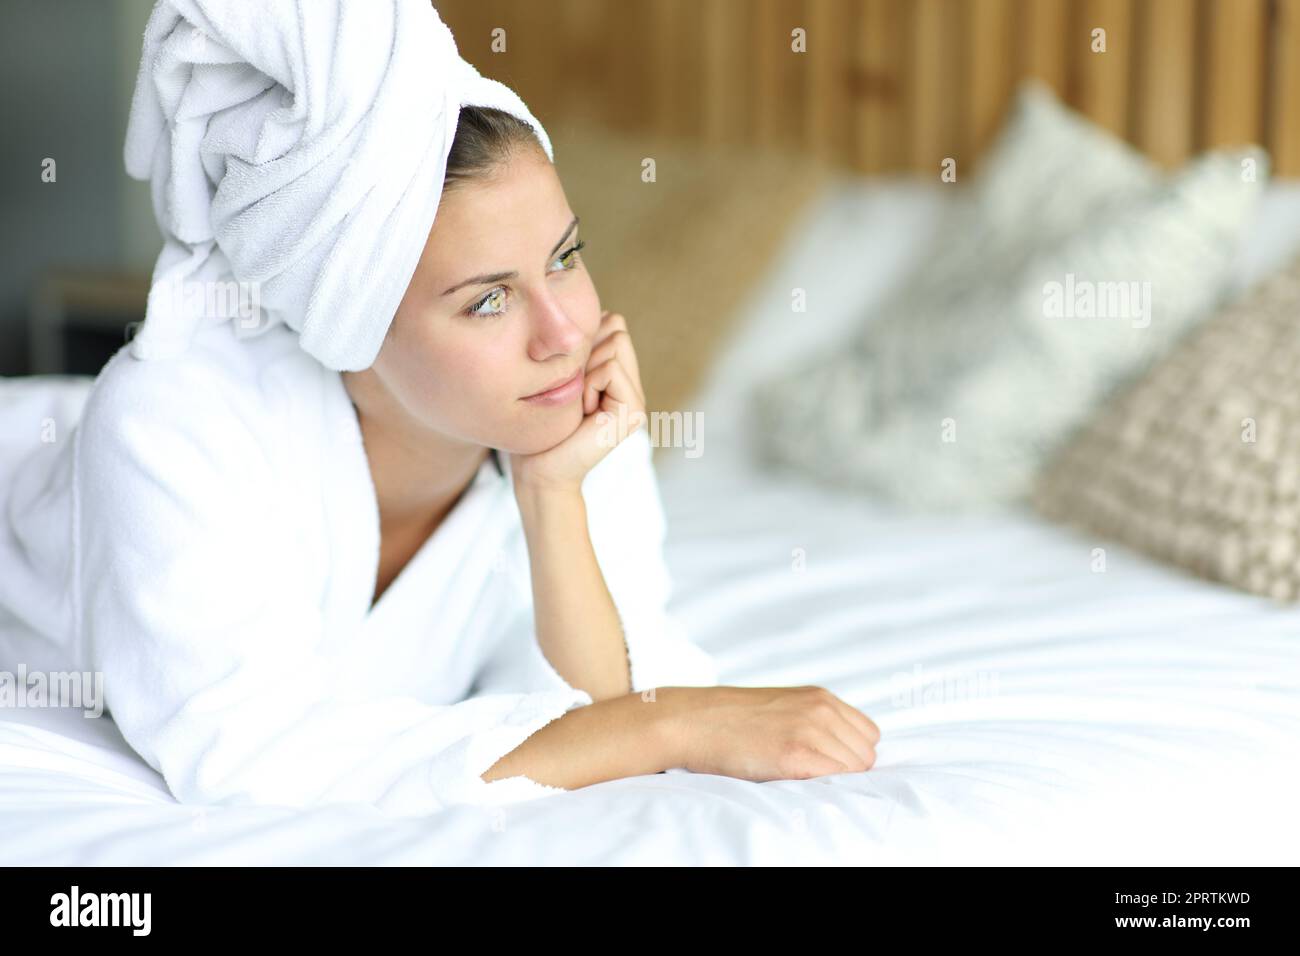 Pensive woman after showering contemplating on the bed Stock Photo